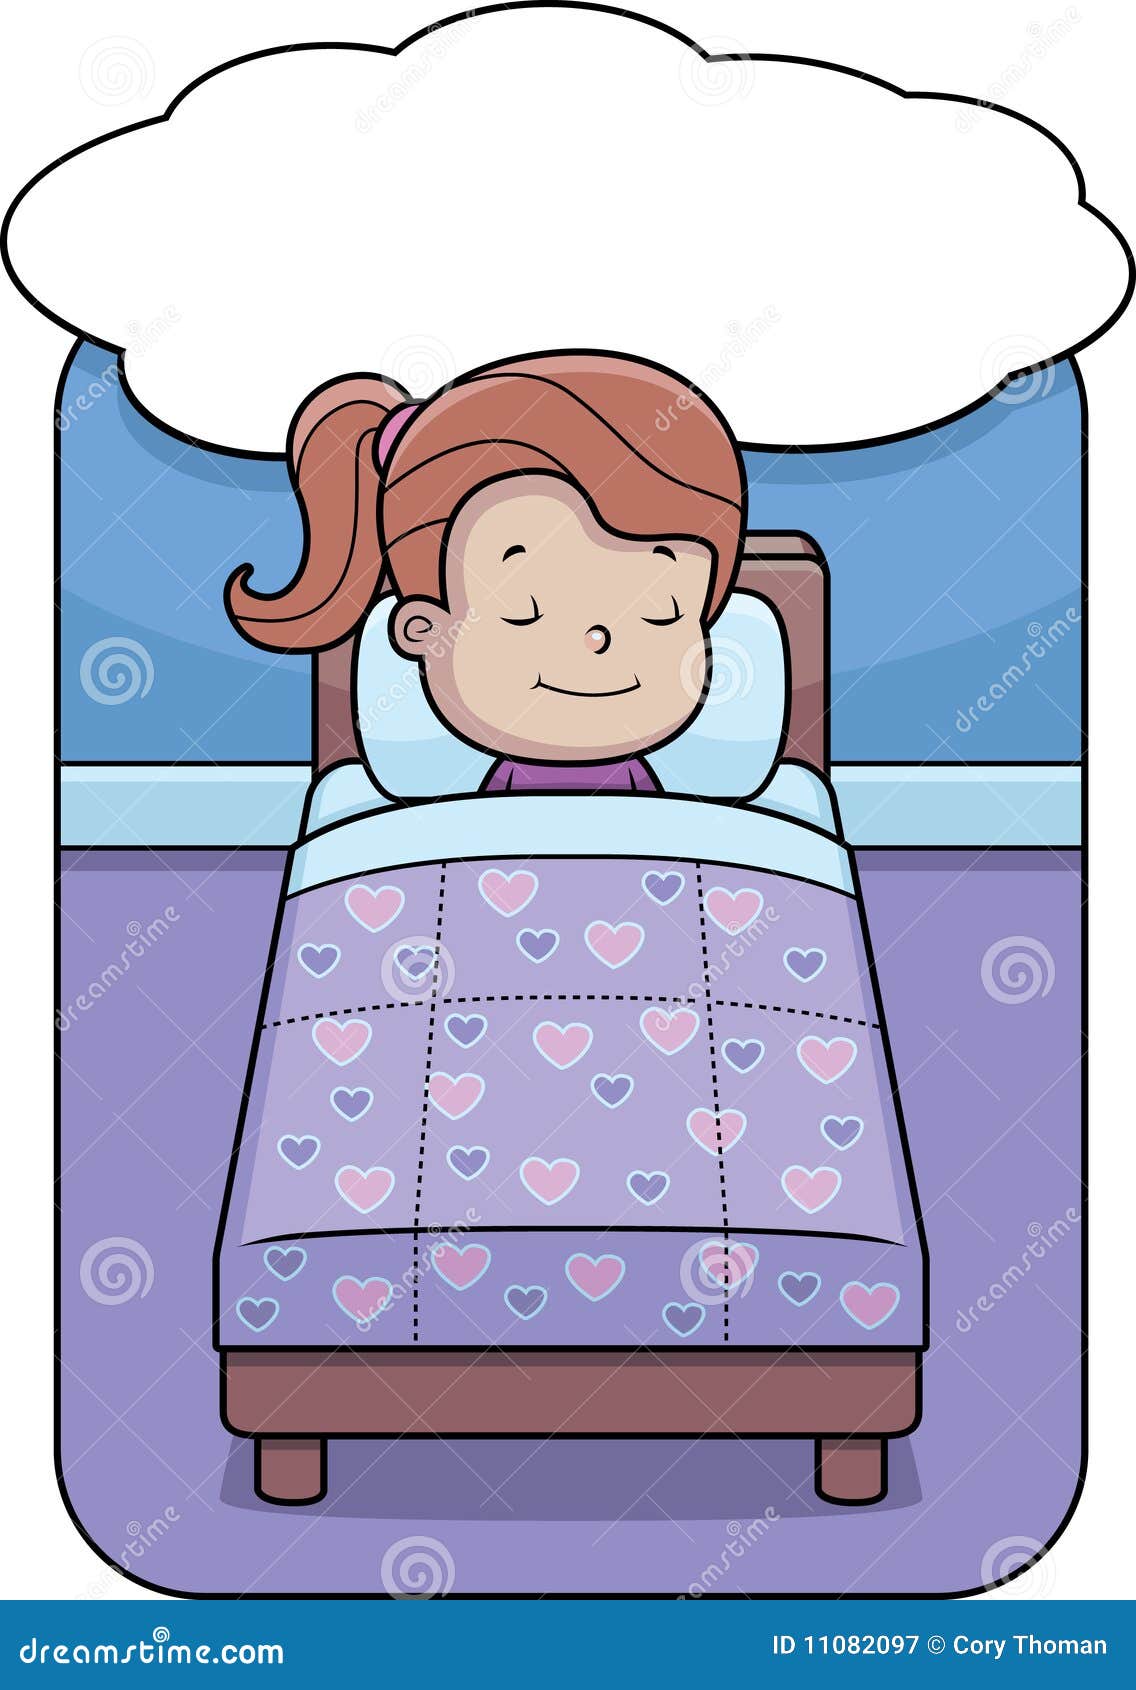 clipart girl in bed - photo #28